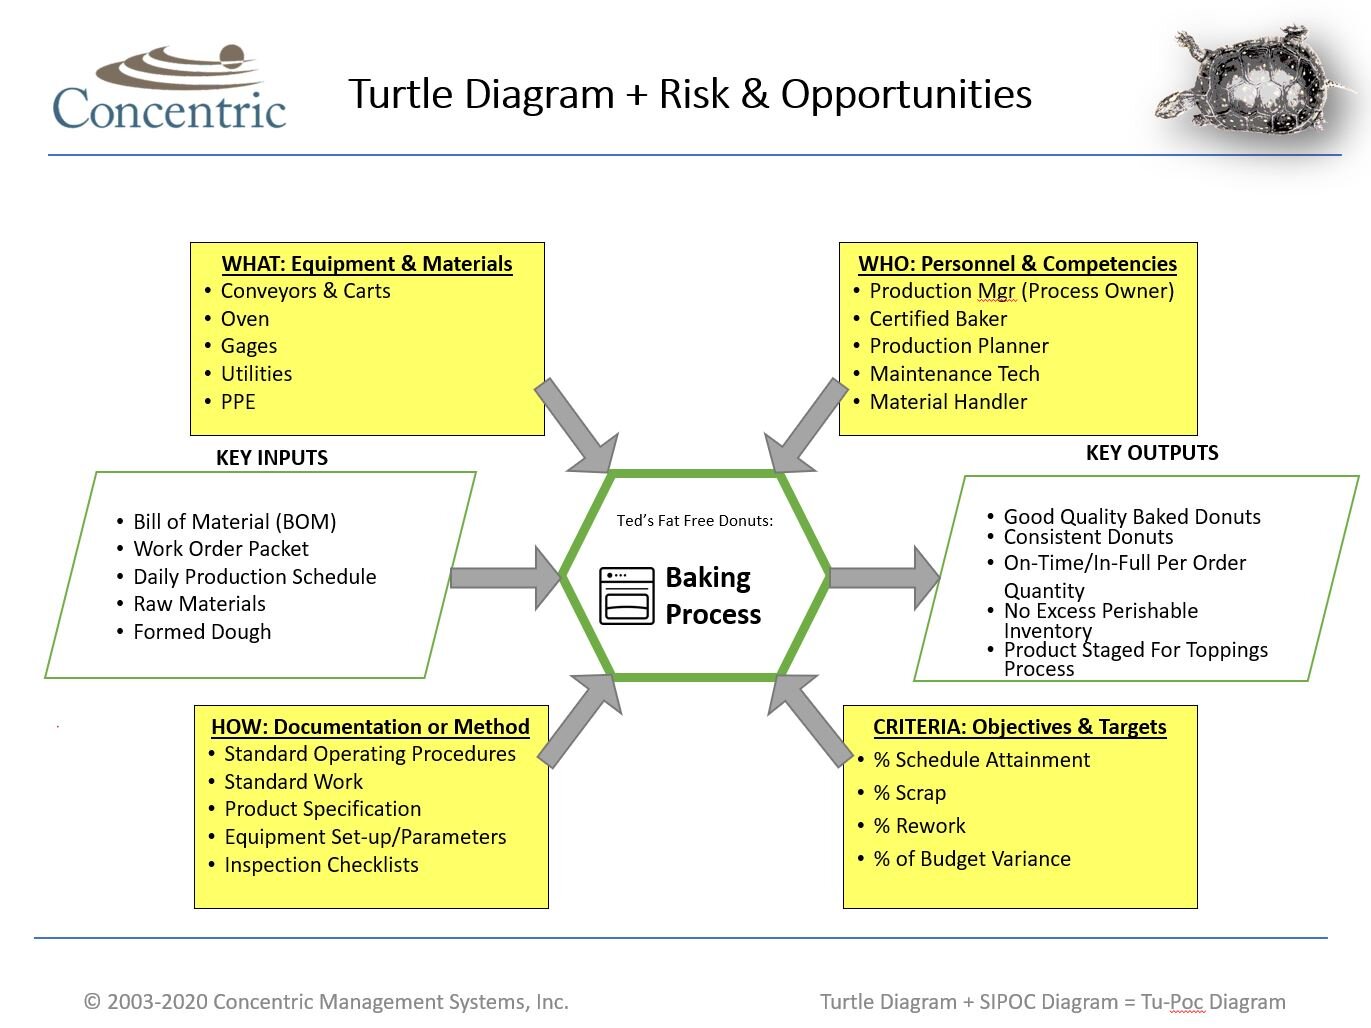 instructions-for-creating-a-turtle-diagram-concentric-global